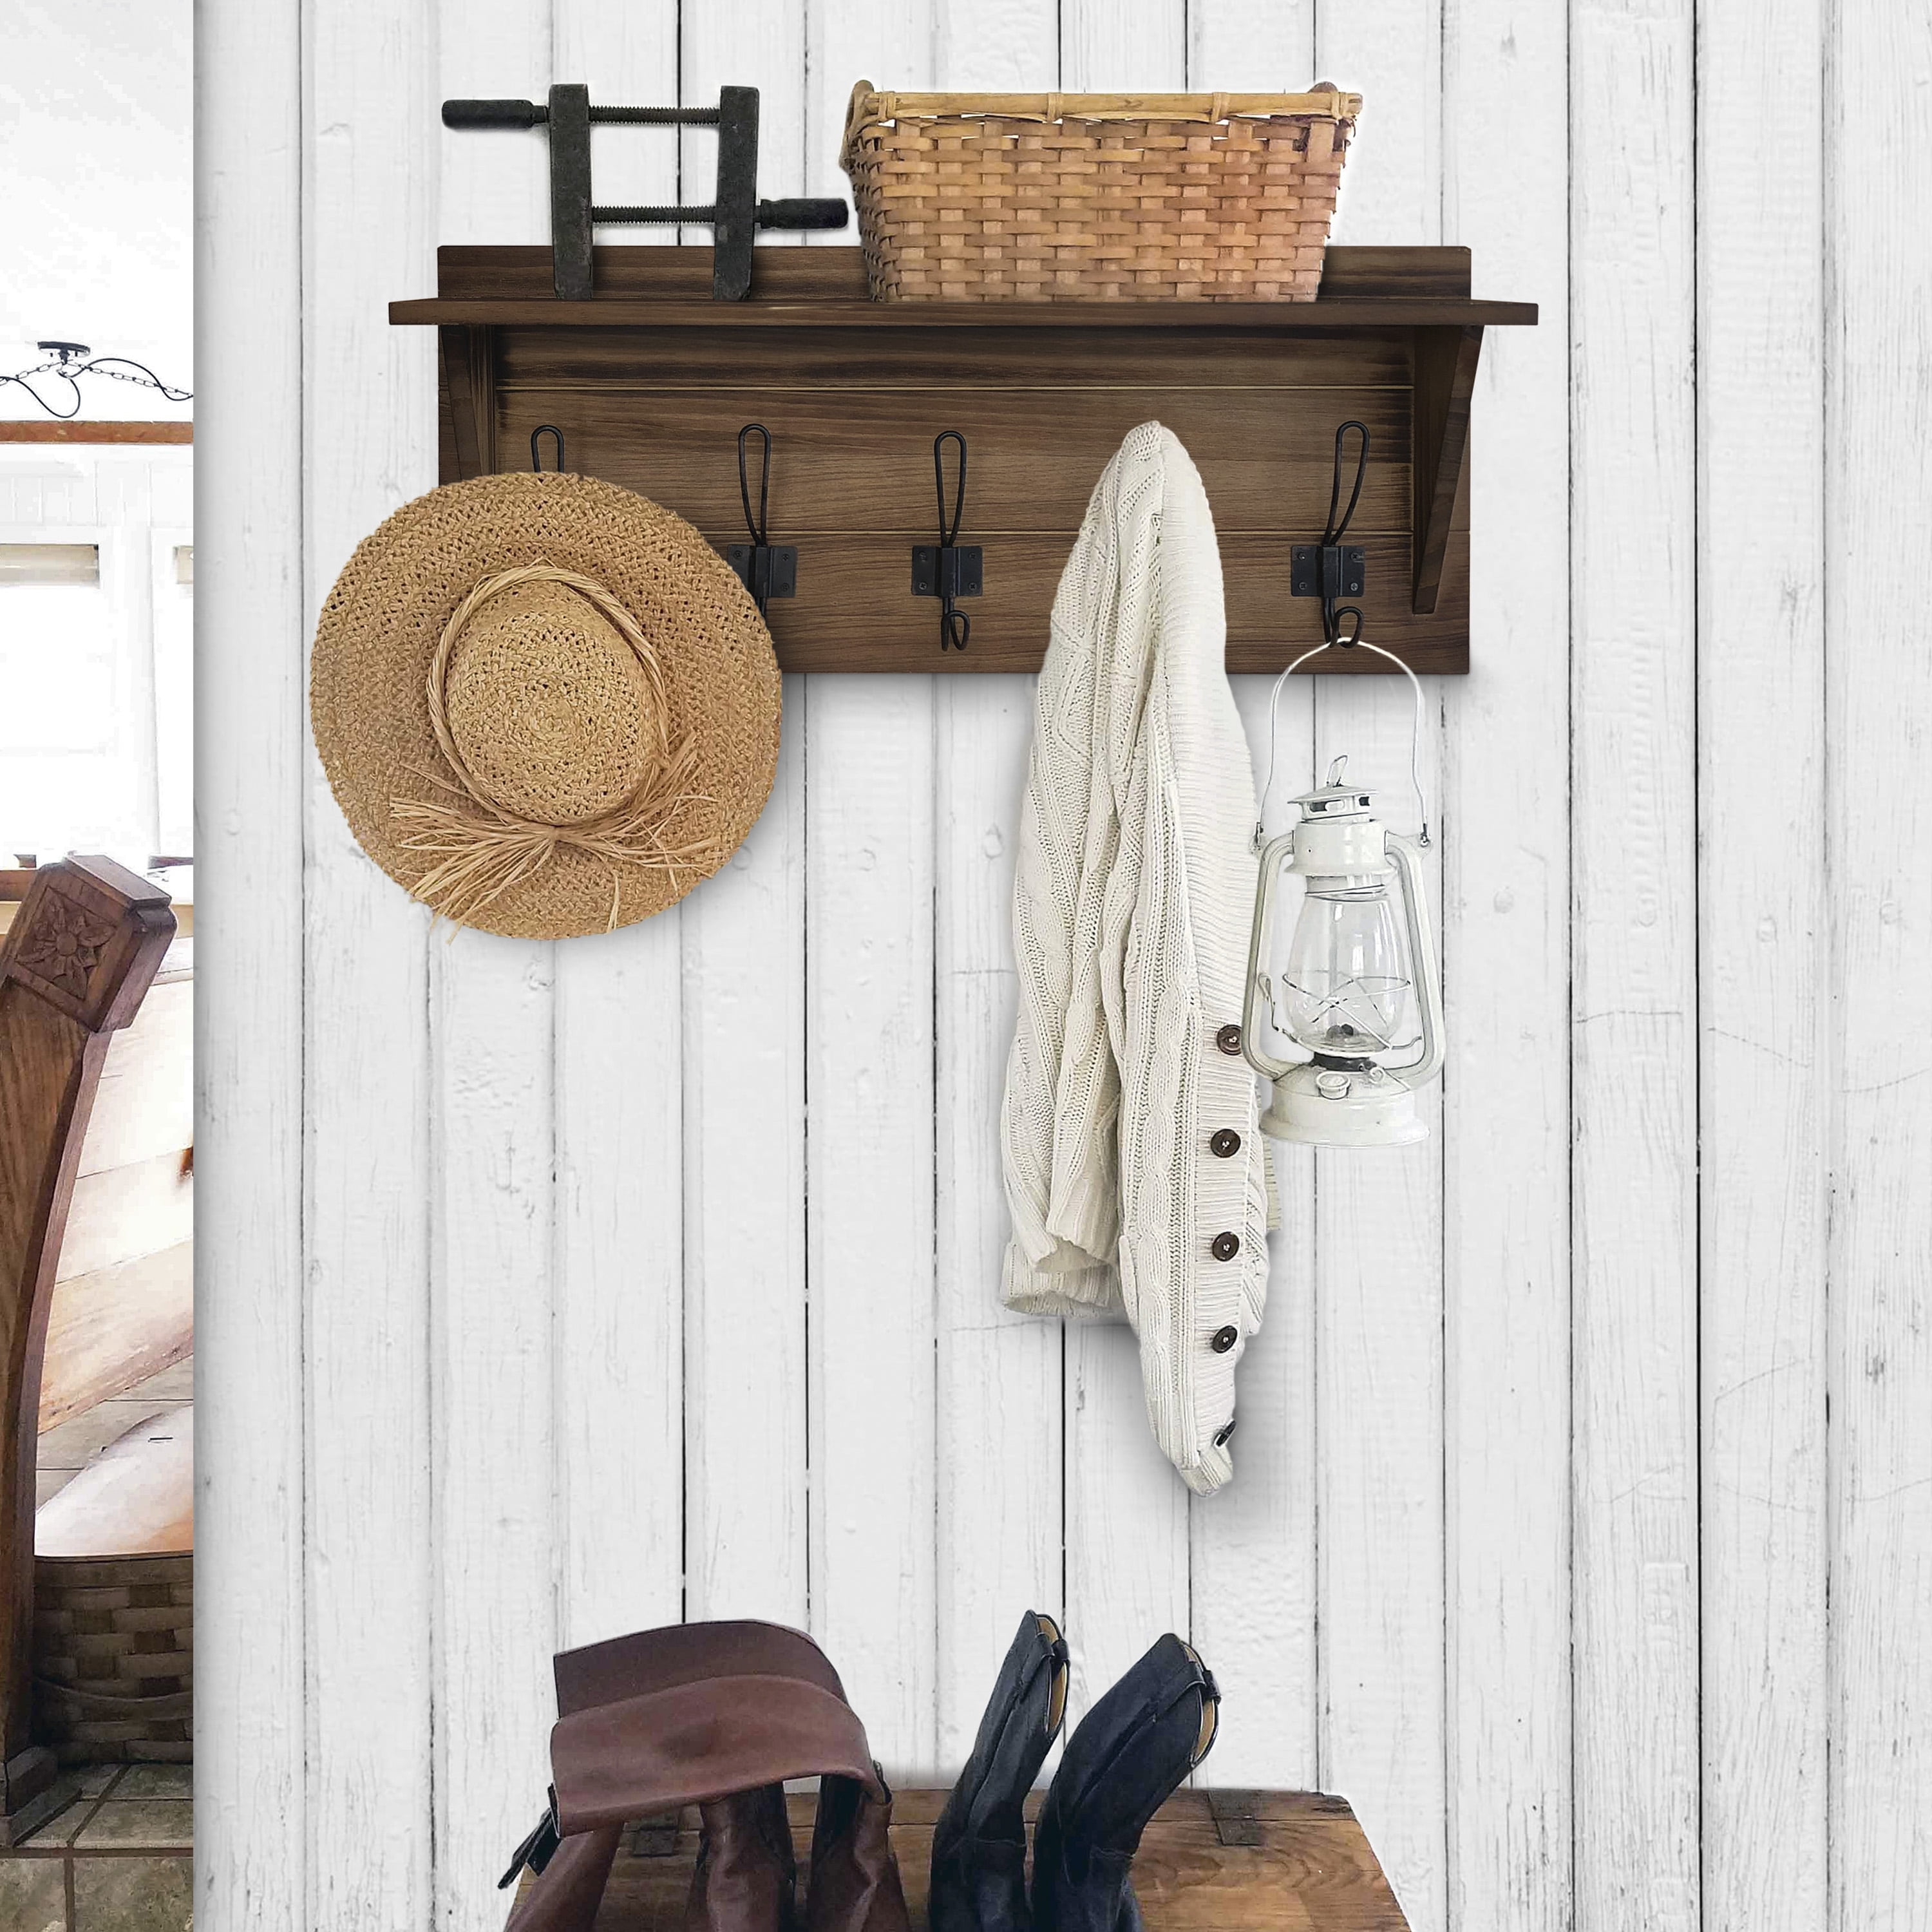 HBCY Creations Rustic Wall Mounted Coat Rack Shelf - Wooden Country Style  24